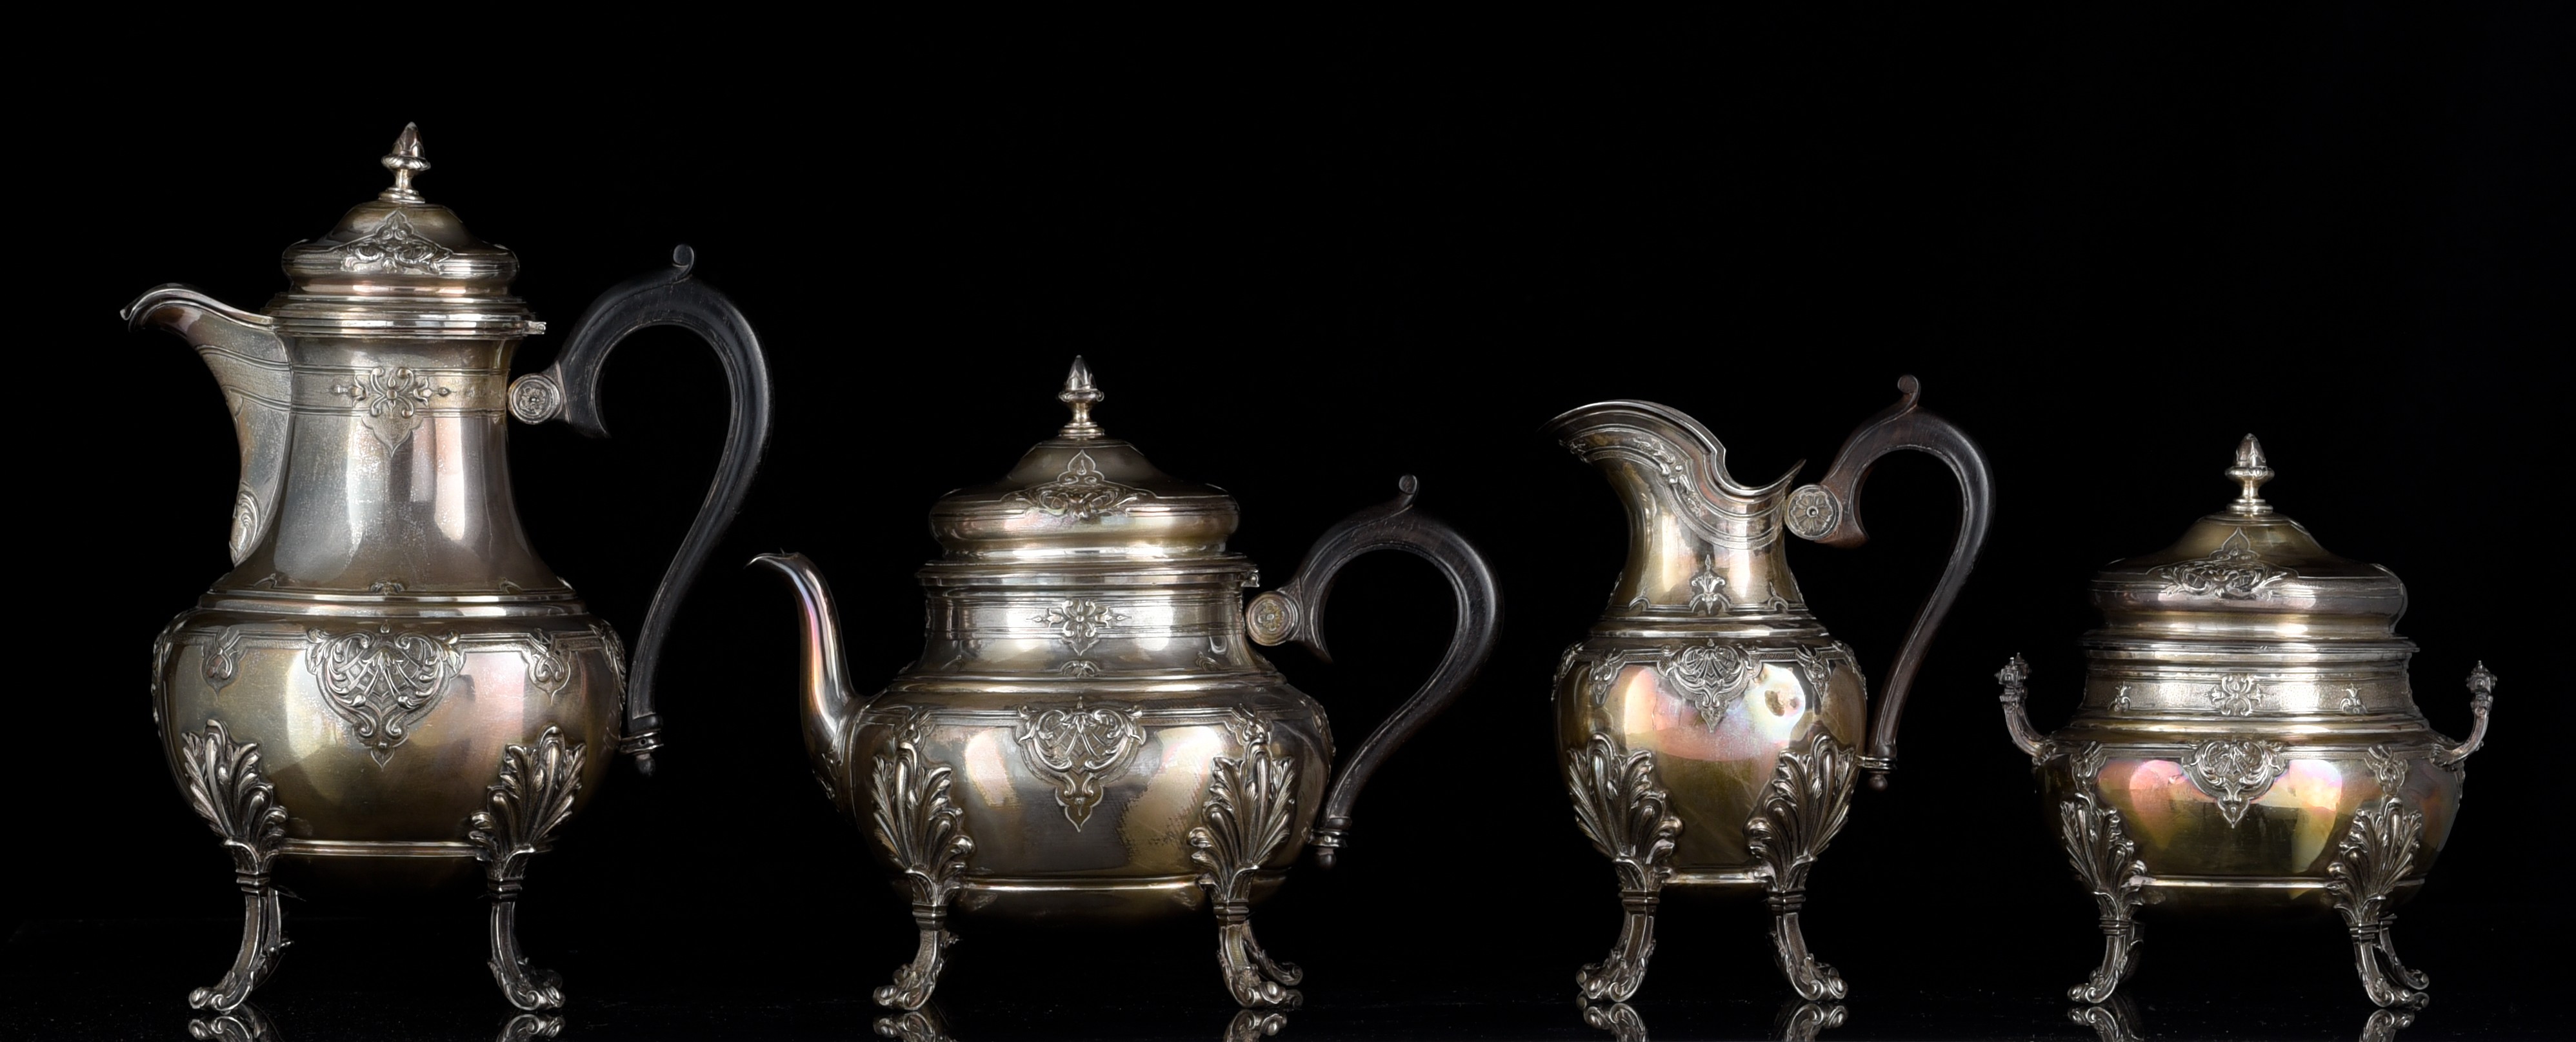 A French Régence style silver coffee and tea set, Georg Roth & Co, Hanau, late 19thC, H 18 - 29 cm - - Image 2 of 21